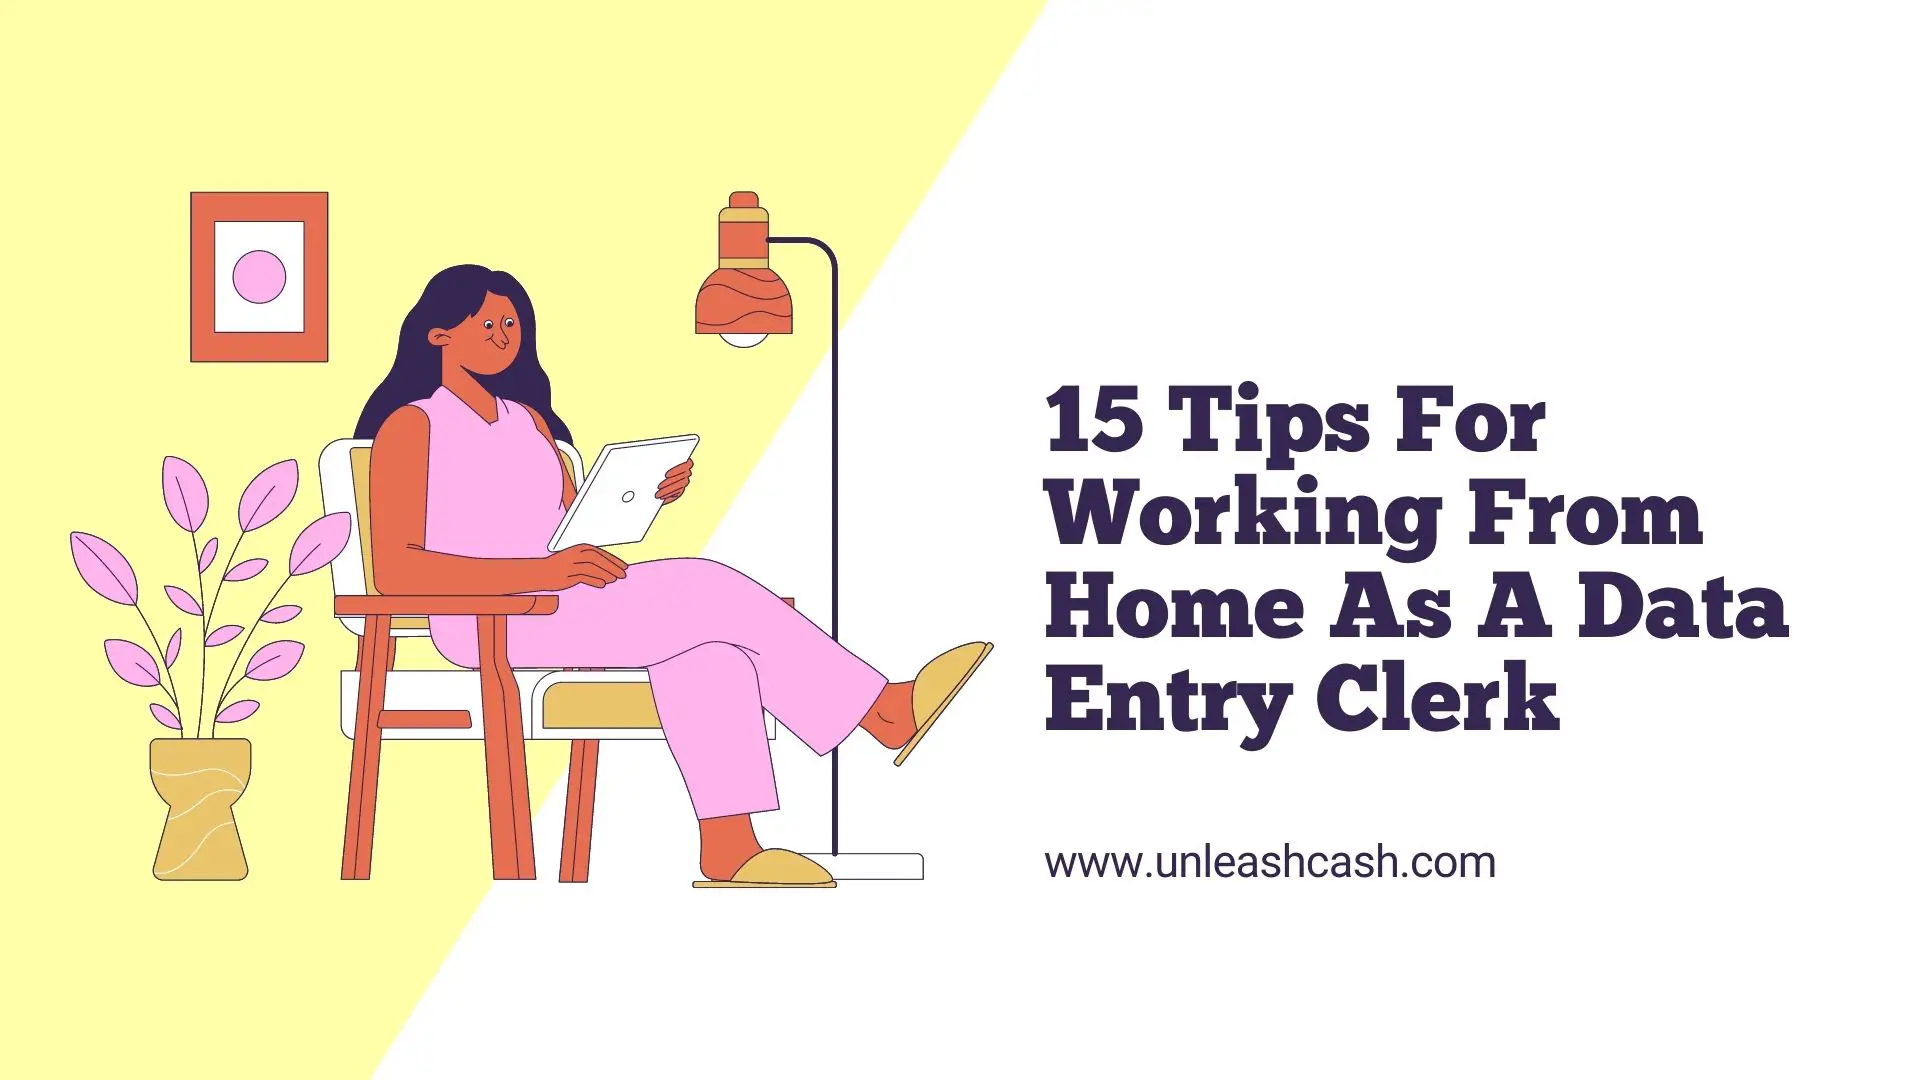 15 Tips For Working From Home As A Data Entry Clerk